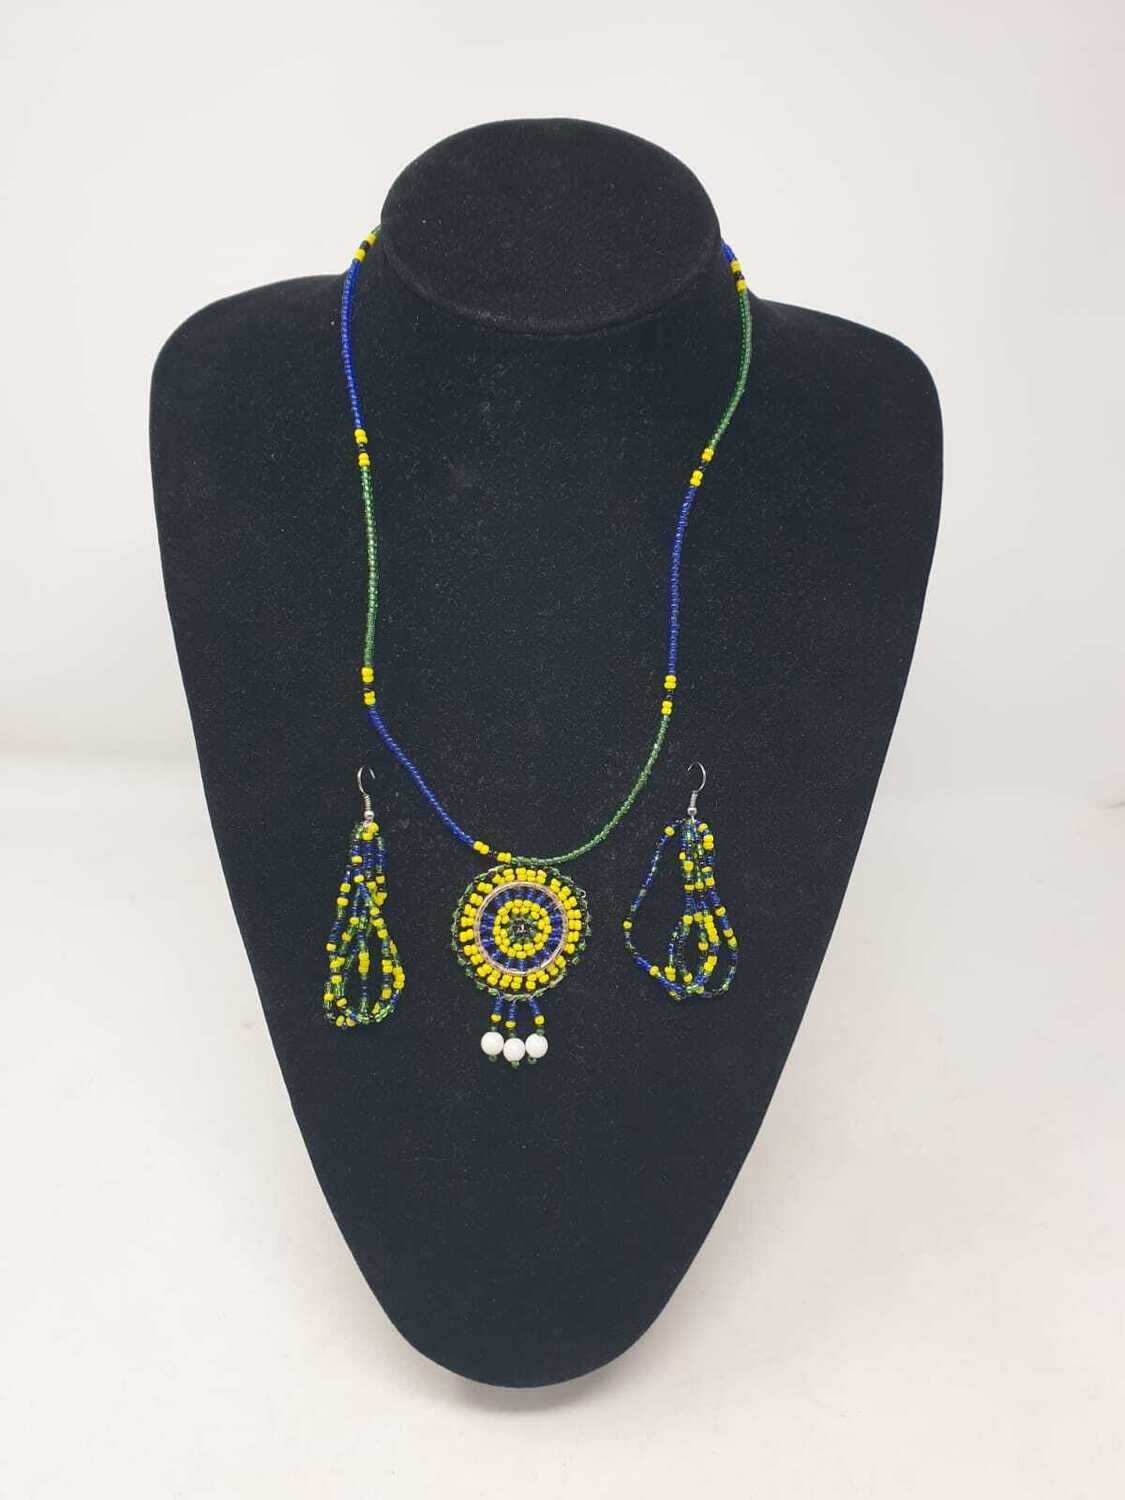 Handbeaded Necklace with Matching Earrings - Tanzania Colors